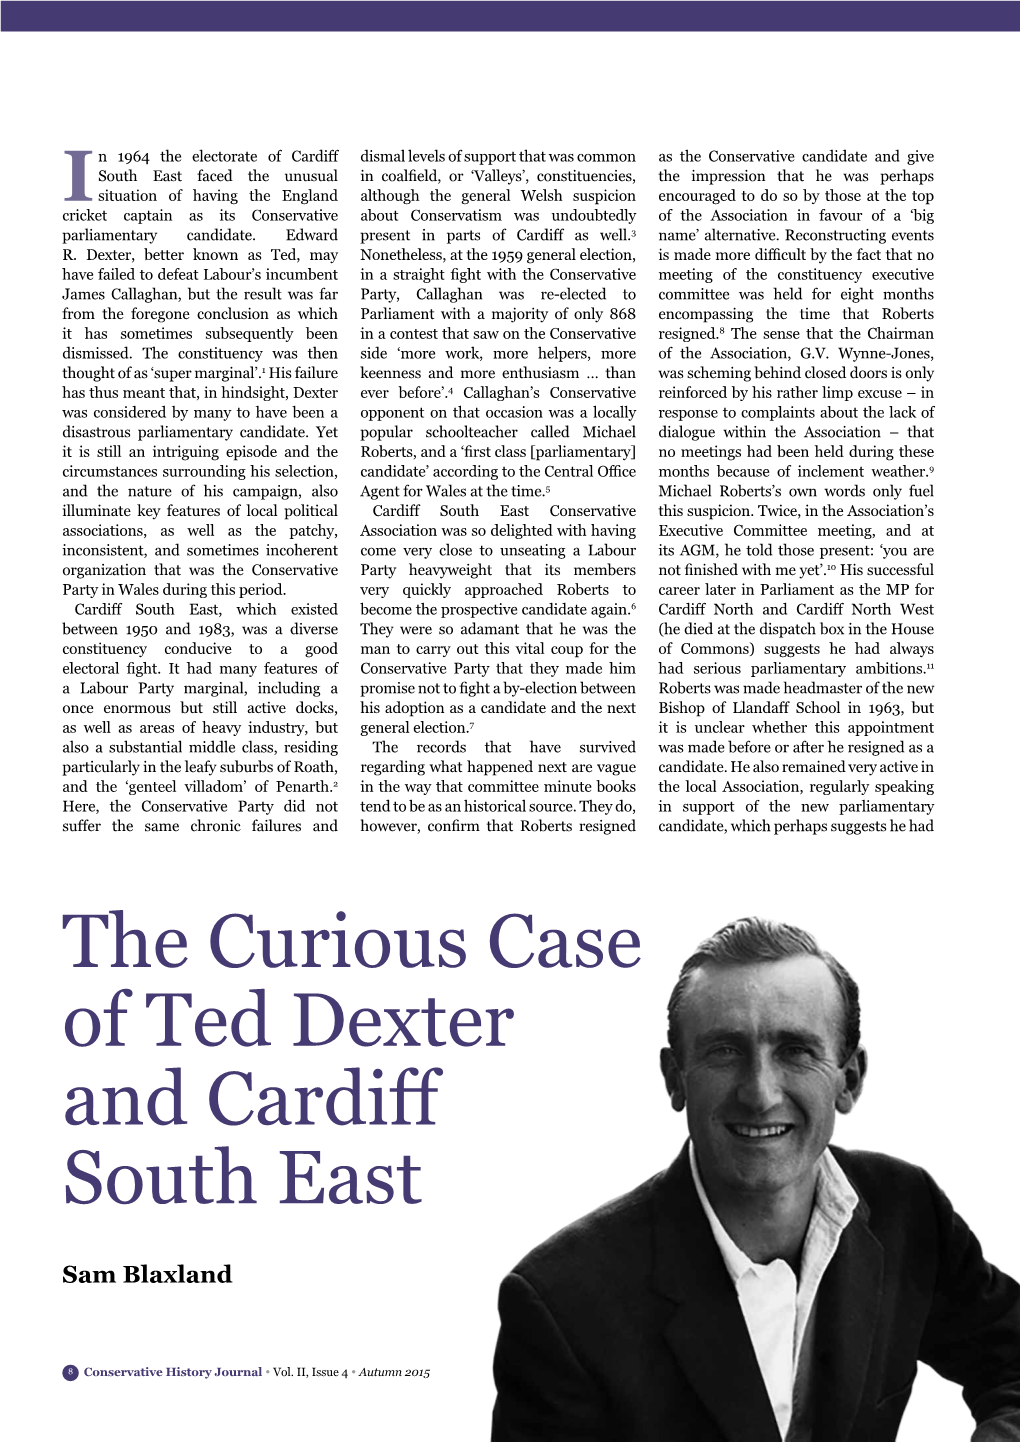 The Curious Case of Ted Dexter and Cardiff South East